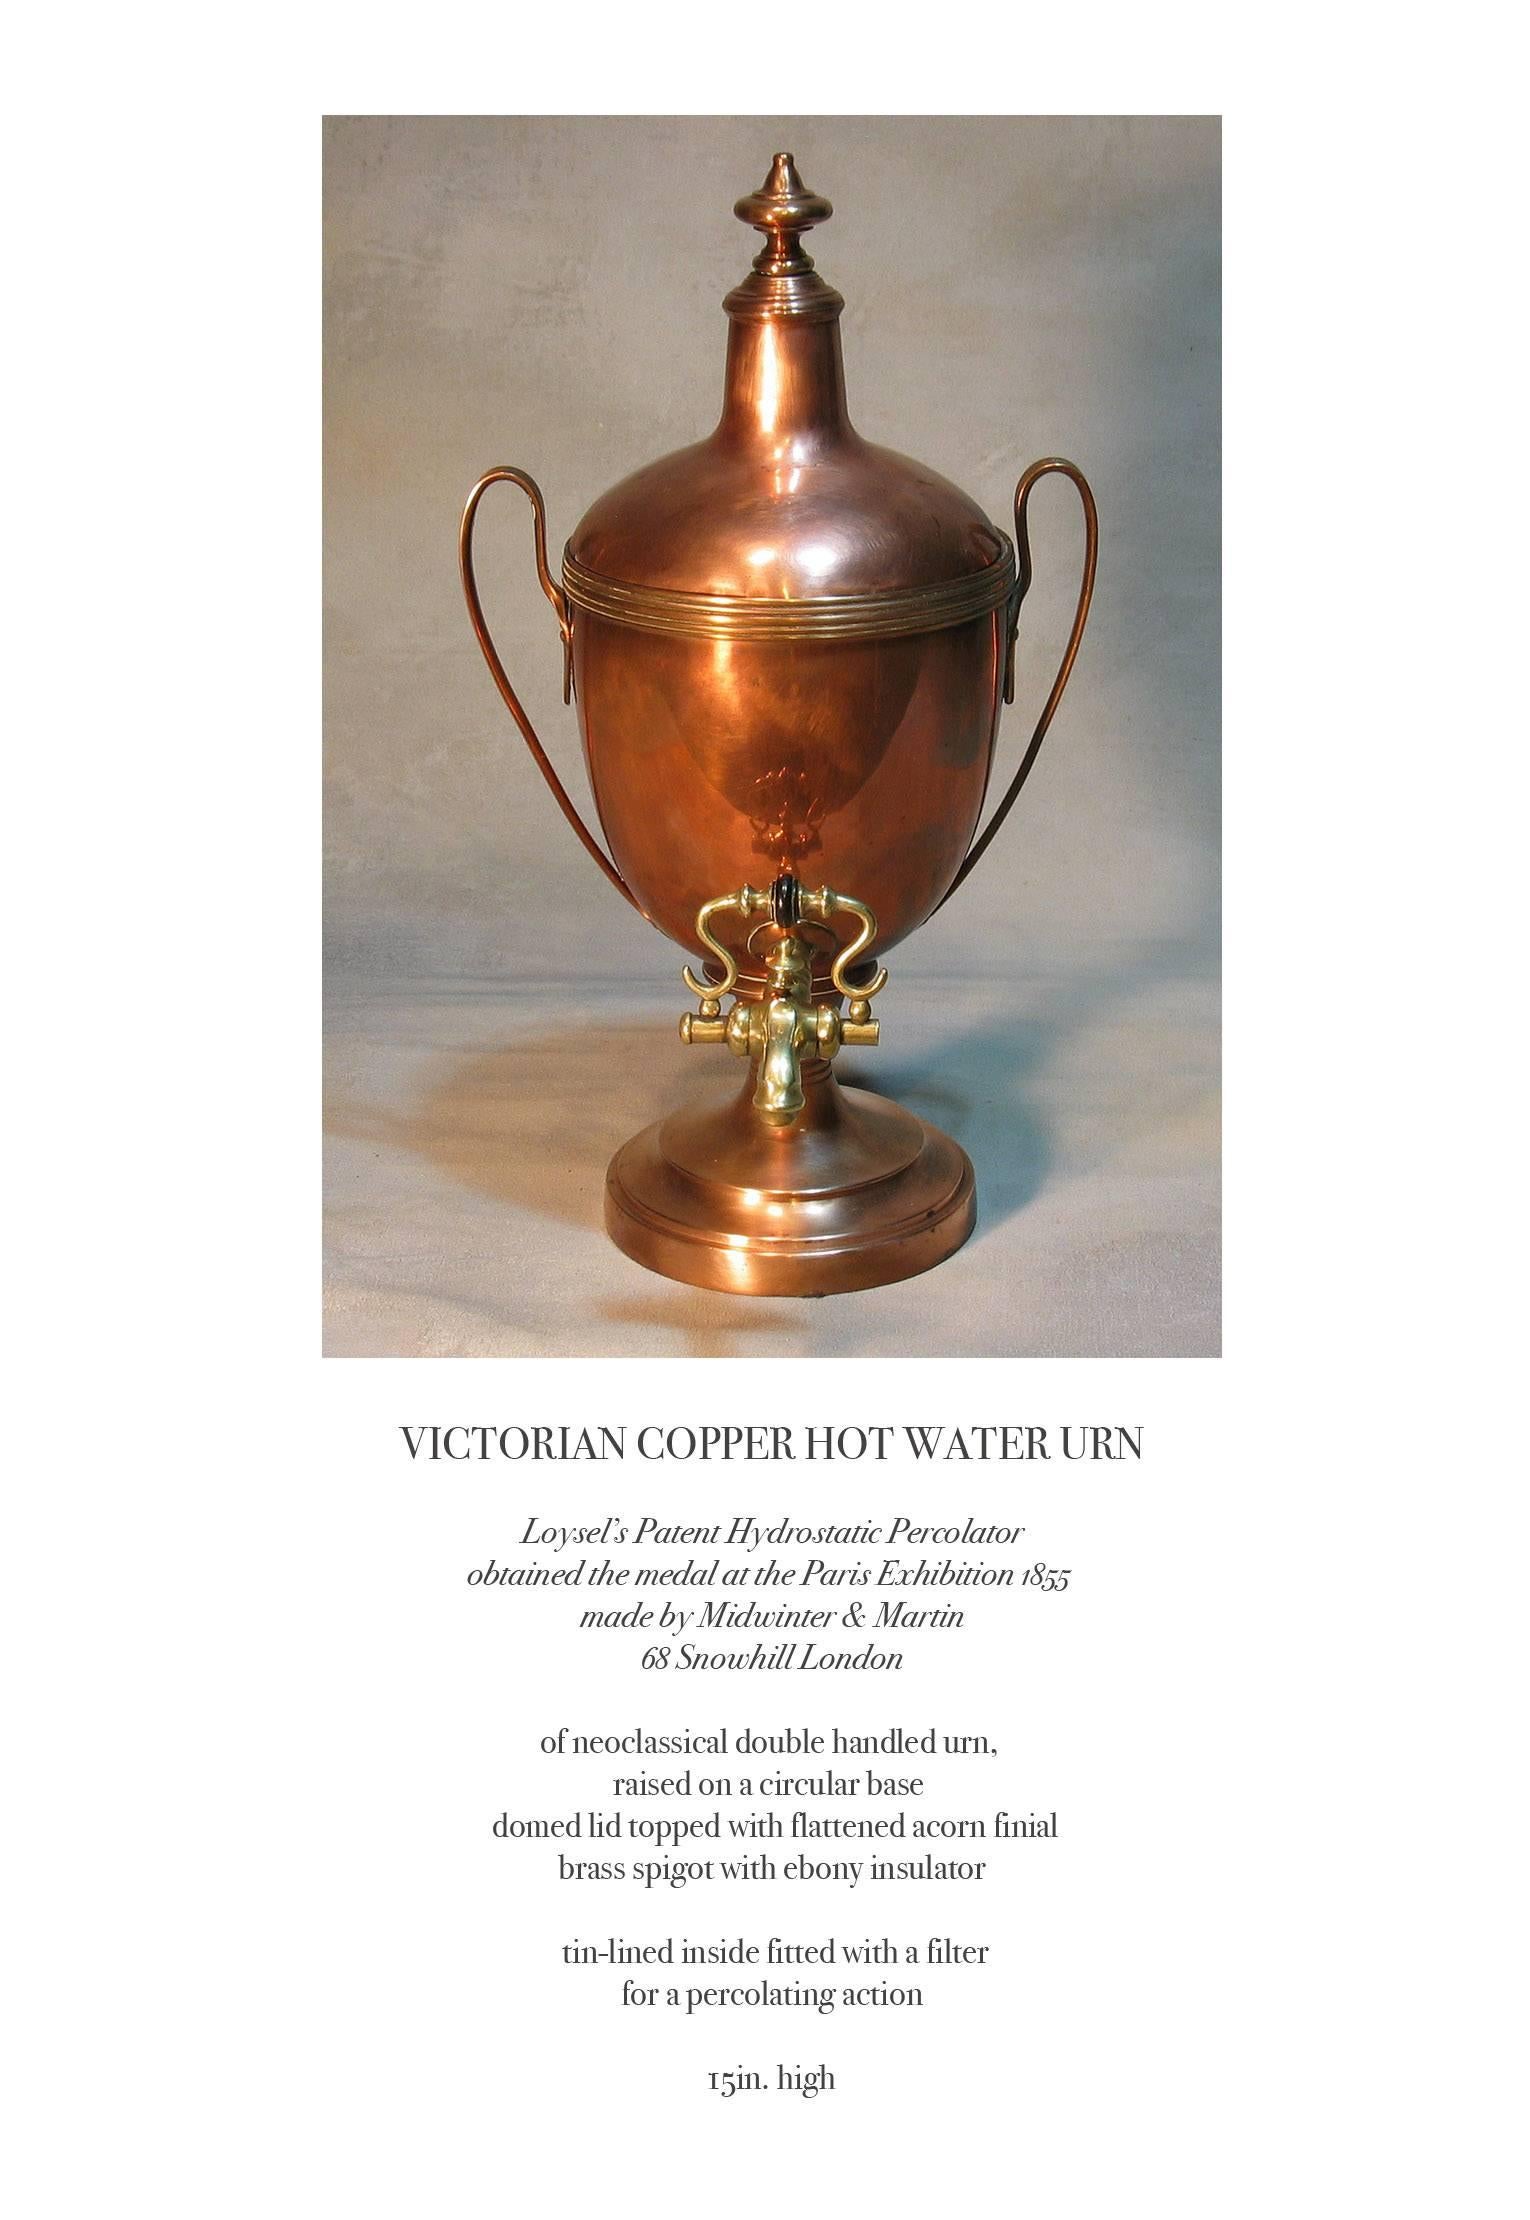 Victorian copper hot water urn, Paris Exhibition 1855 medal winner design, Loysel's patent hydrostatic percolator obtained the medal at the Paris Exhibition in 1855, made by Midwinter & Martin, 68 Snowhill London. A neoclassical double turned